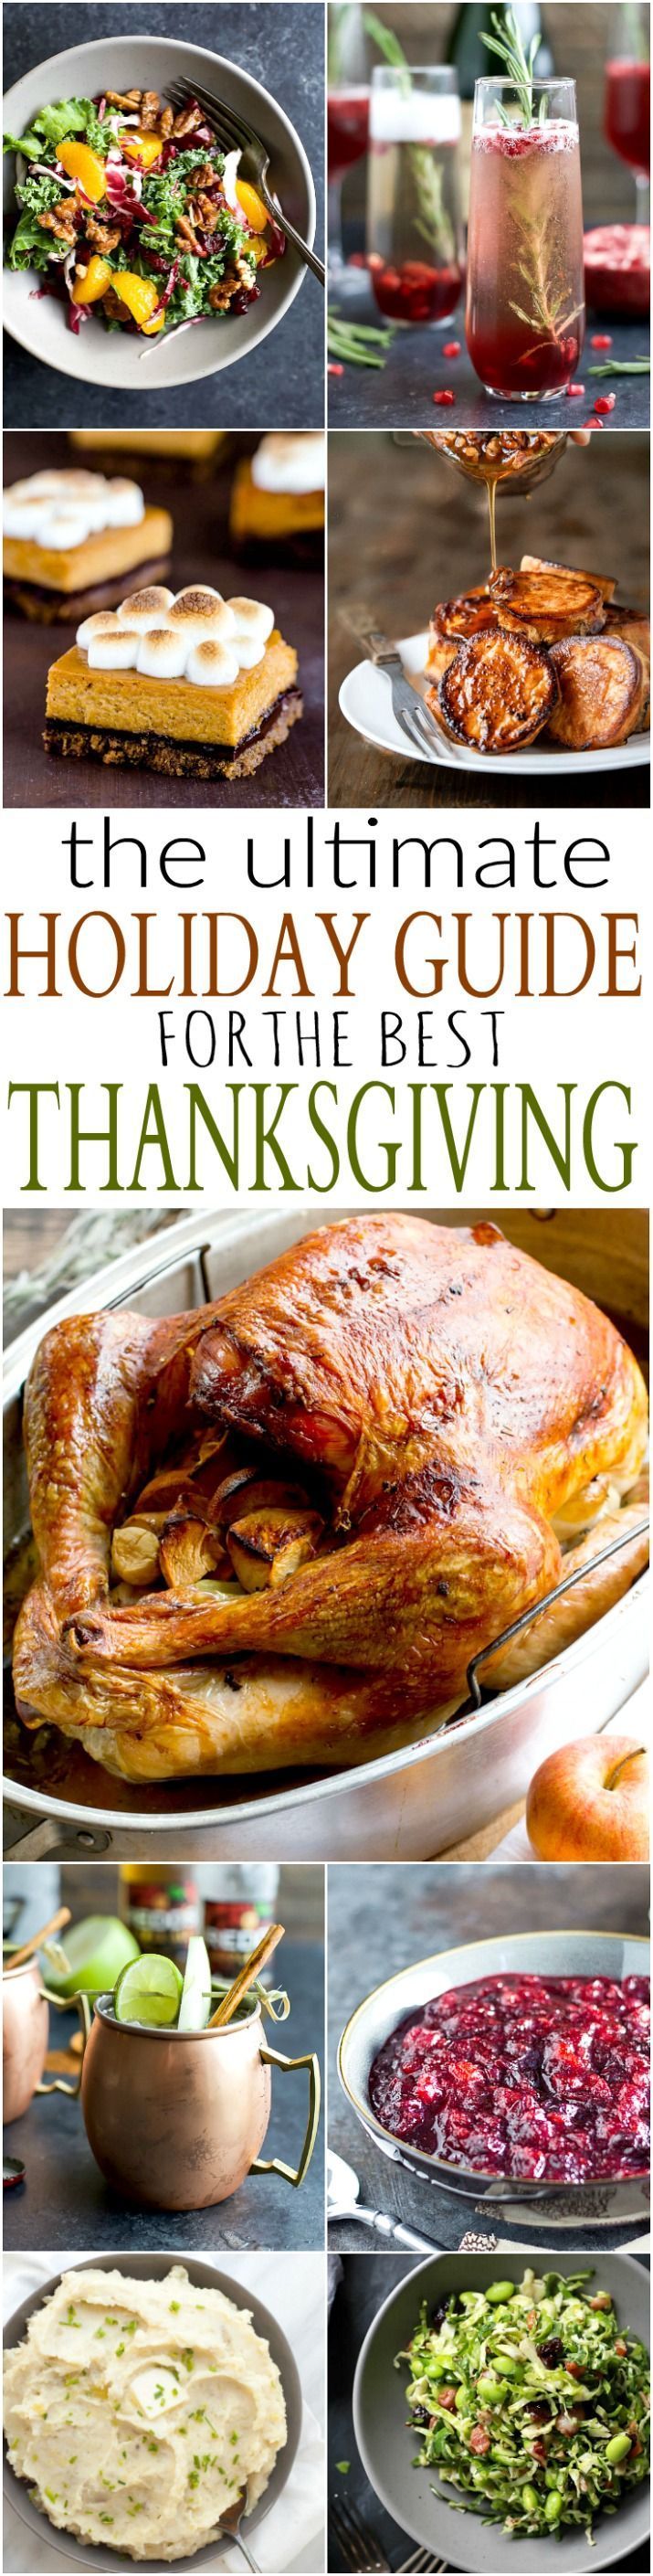 Look no further with the ULTIMATE Holiday Guide for Thanksgiving! This Turkey Day roundup has 45+ Thanksgiving recipes to ensure